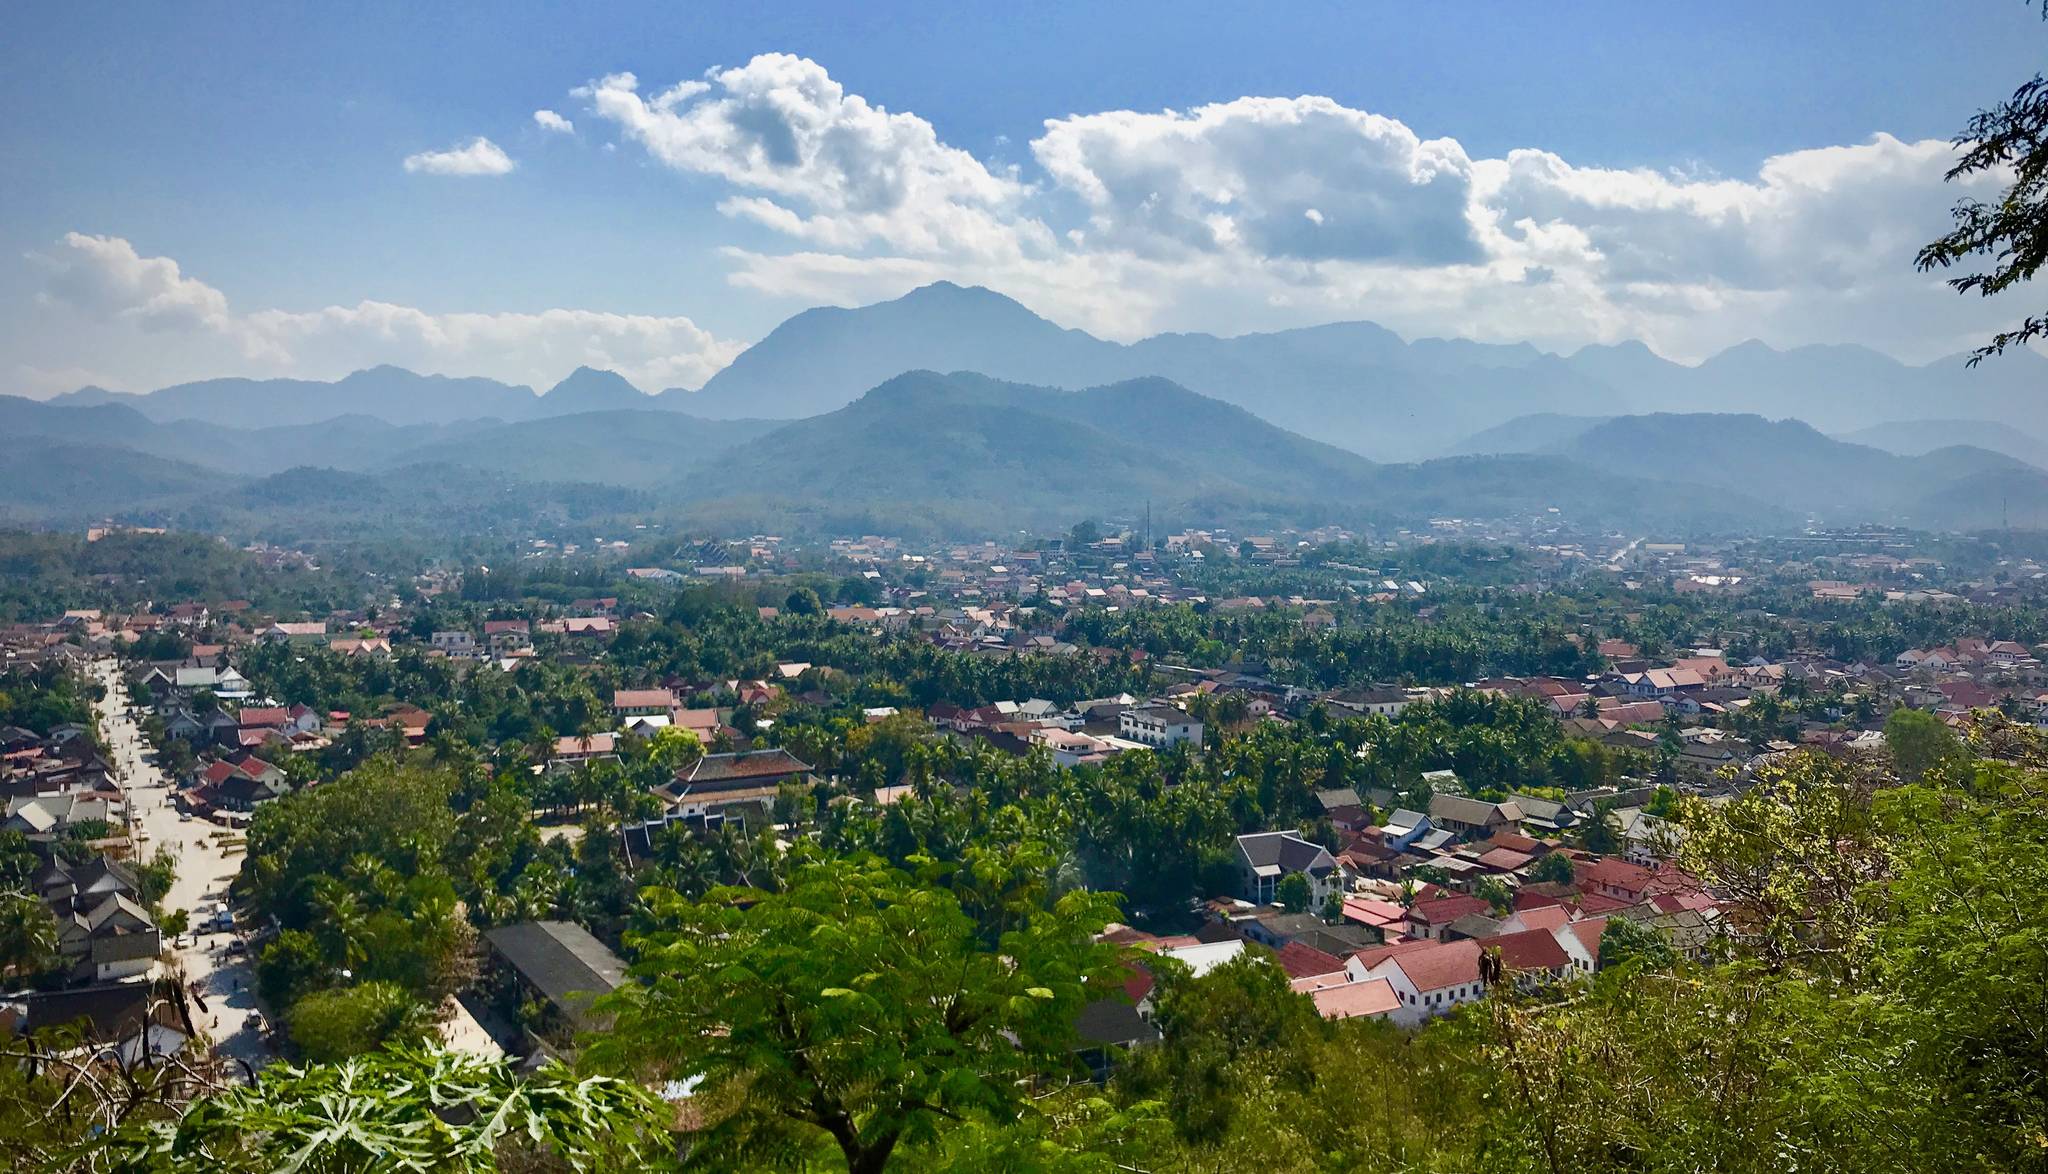 The view of Luang Prabang, in north central Laos. Photo courtesy of Garth Schmeck